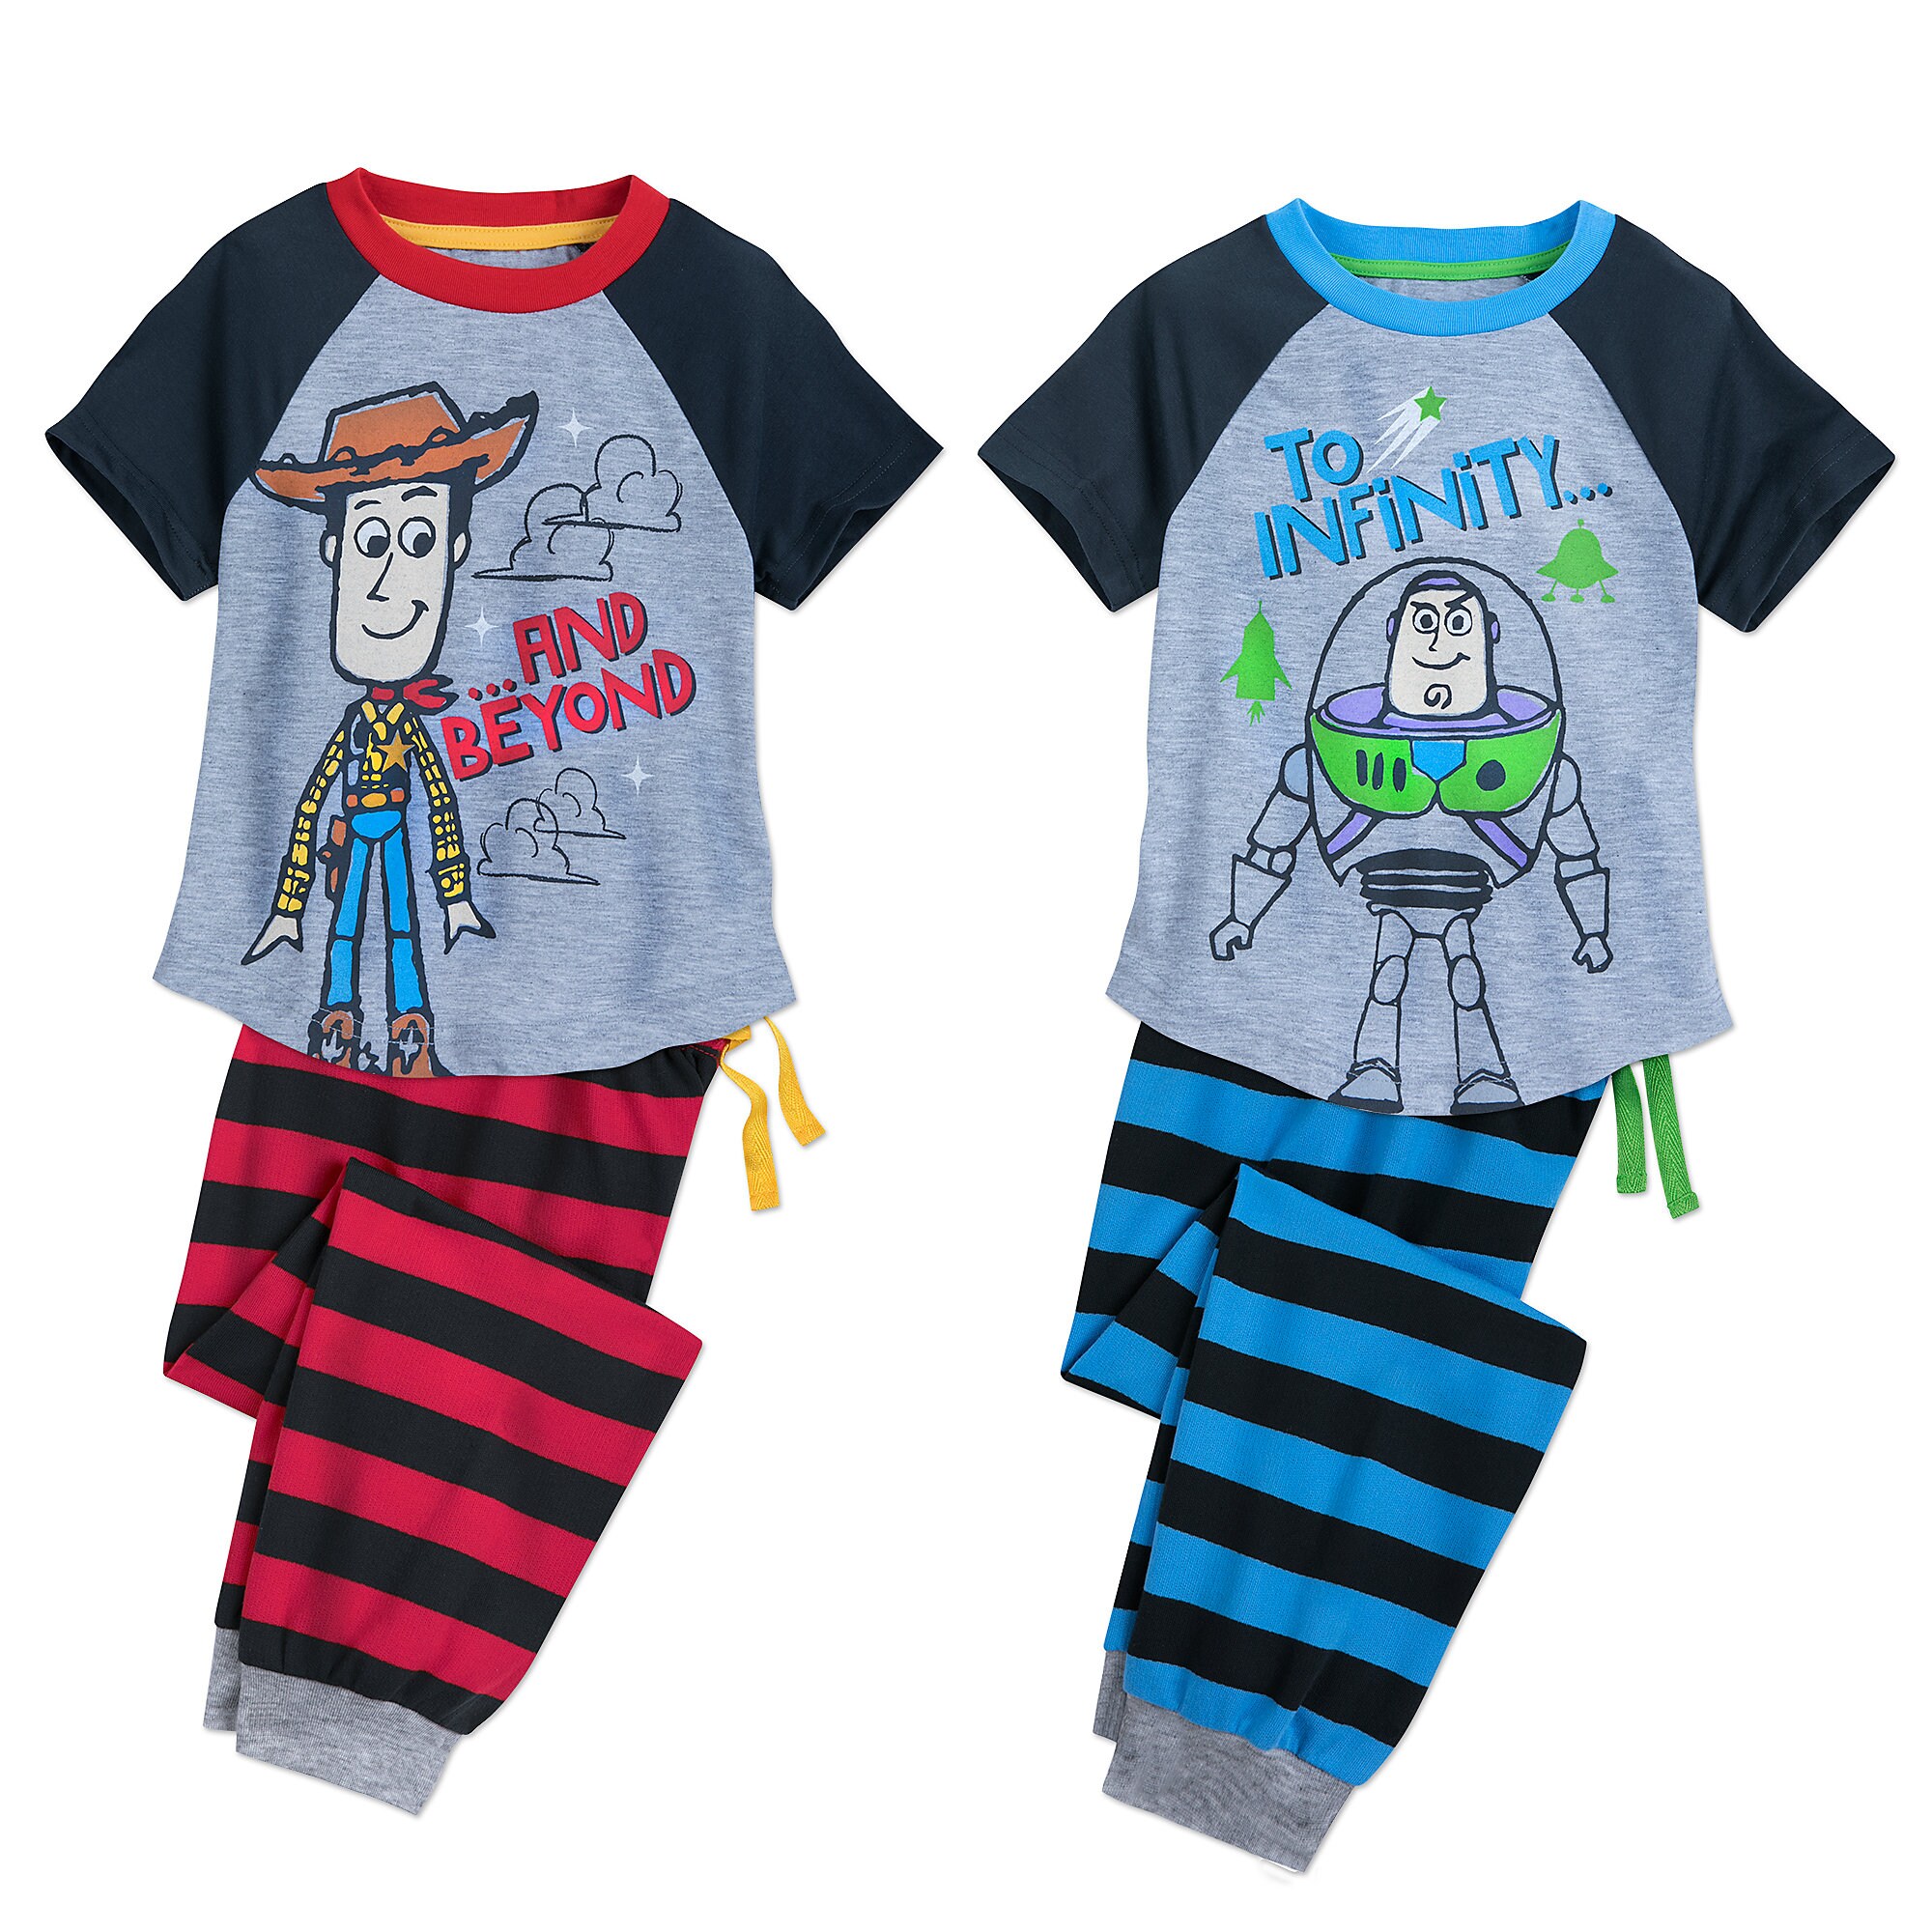 Toy Story Best Friends PJ Sets for Kids - 2-Pack